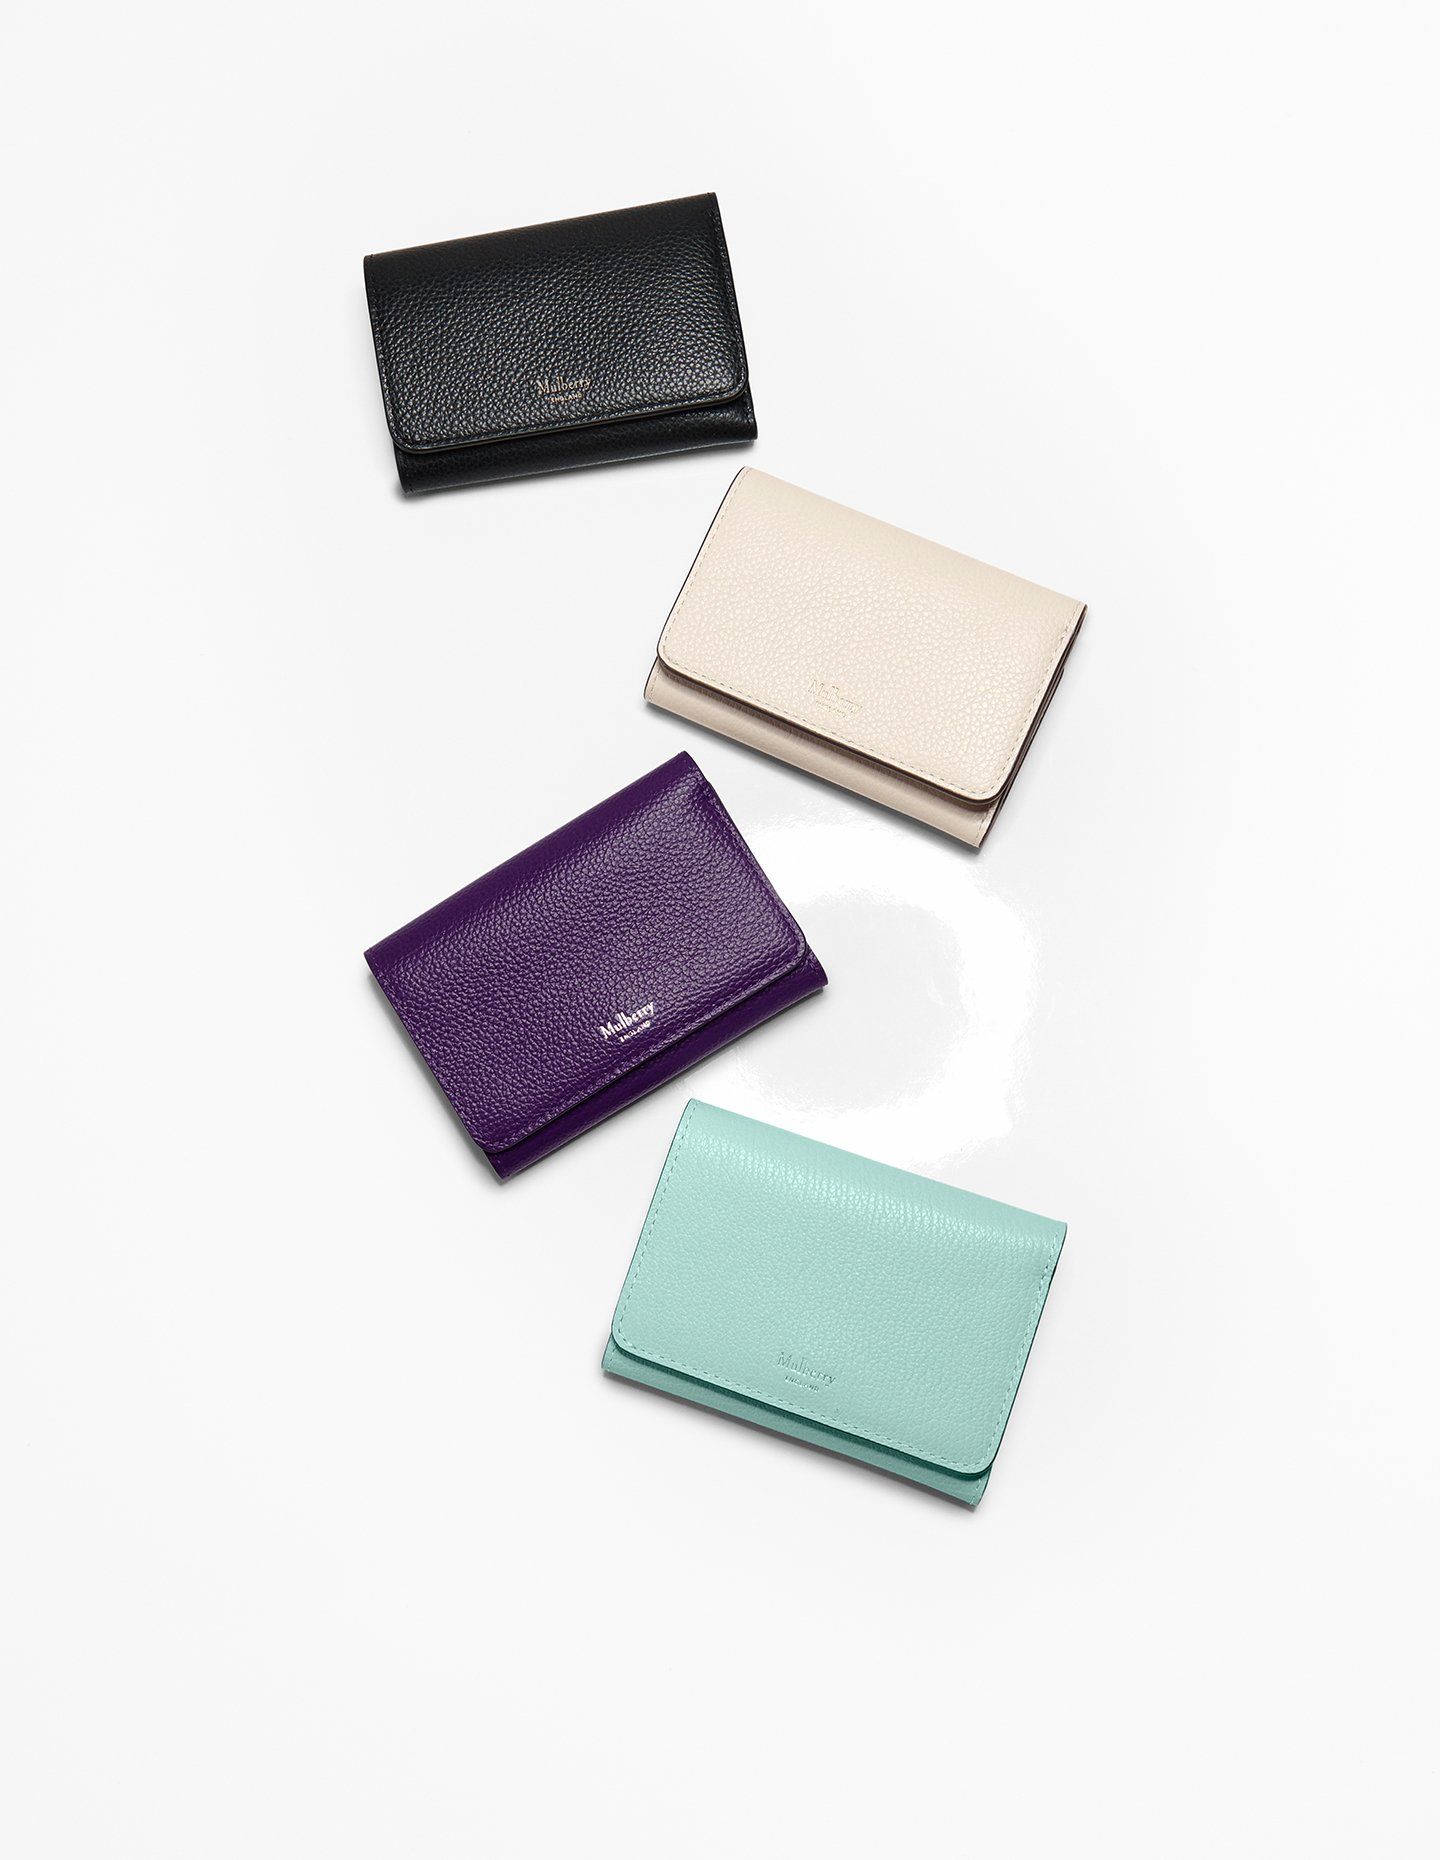 Four Mulberry wallets in black, purple, chalk and acrylic green